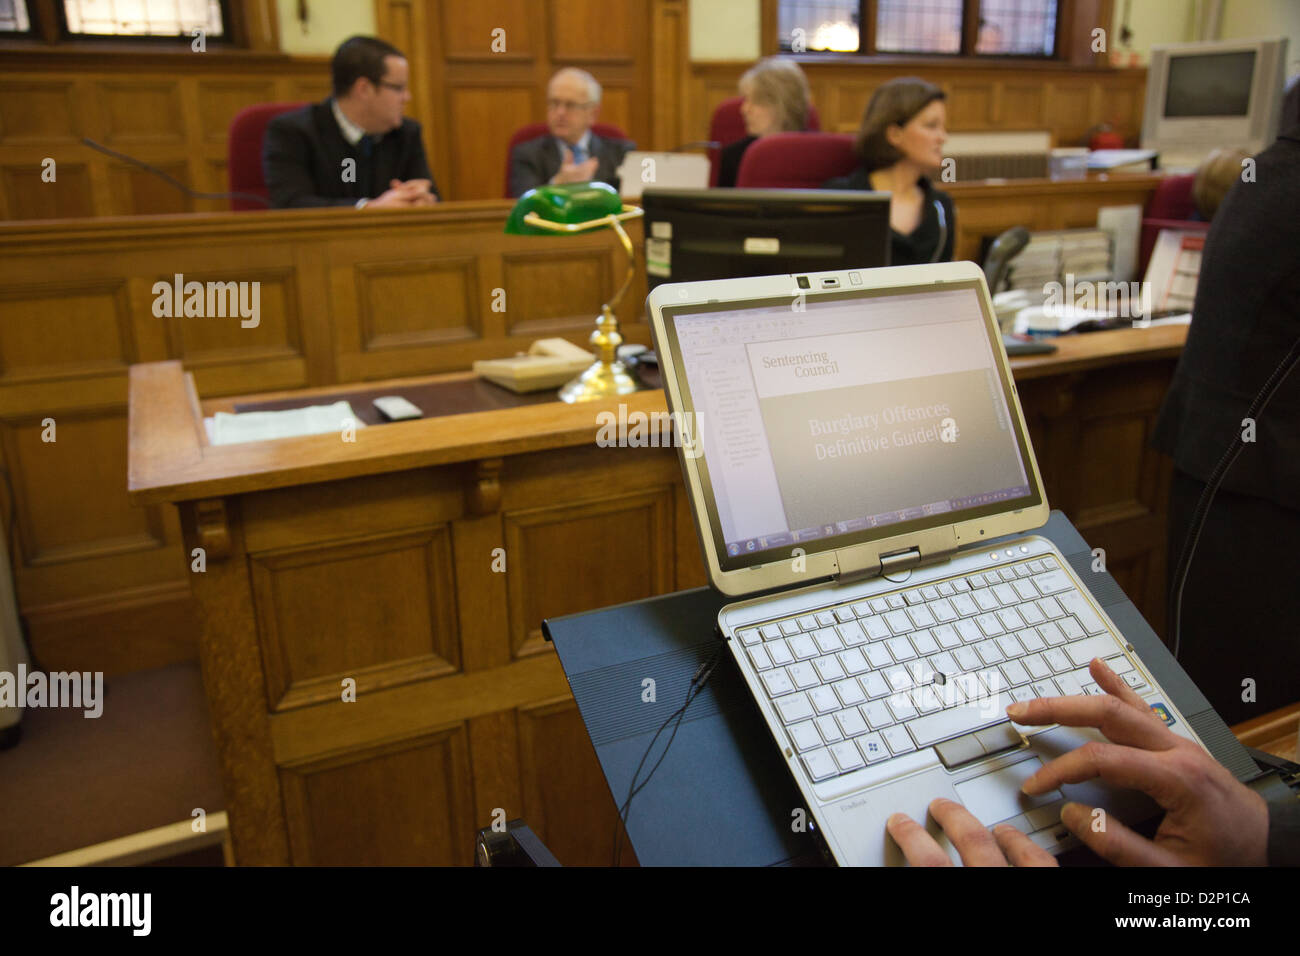 Photo which illustrates the use of technology inside court, in particular a tablet. Pictures is Maidstone Magistrates in Kent Stock Photo